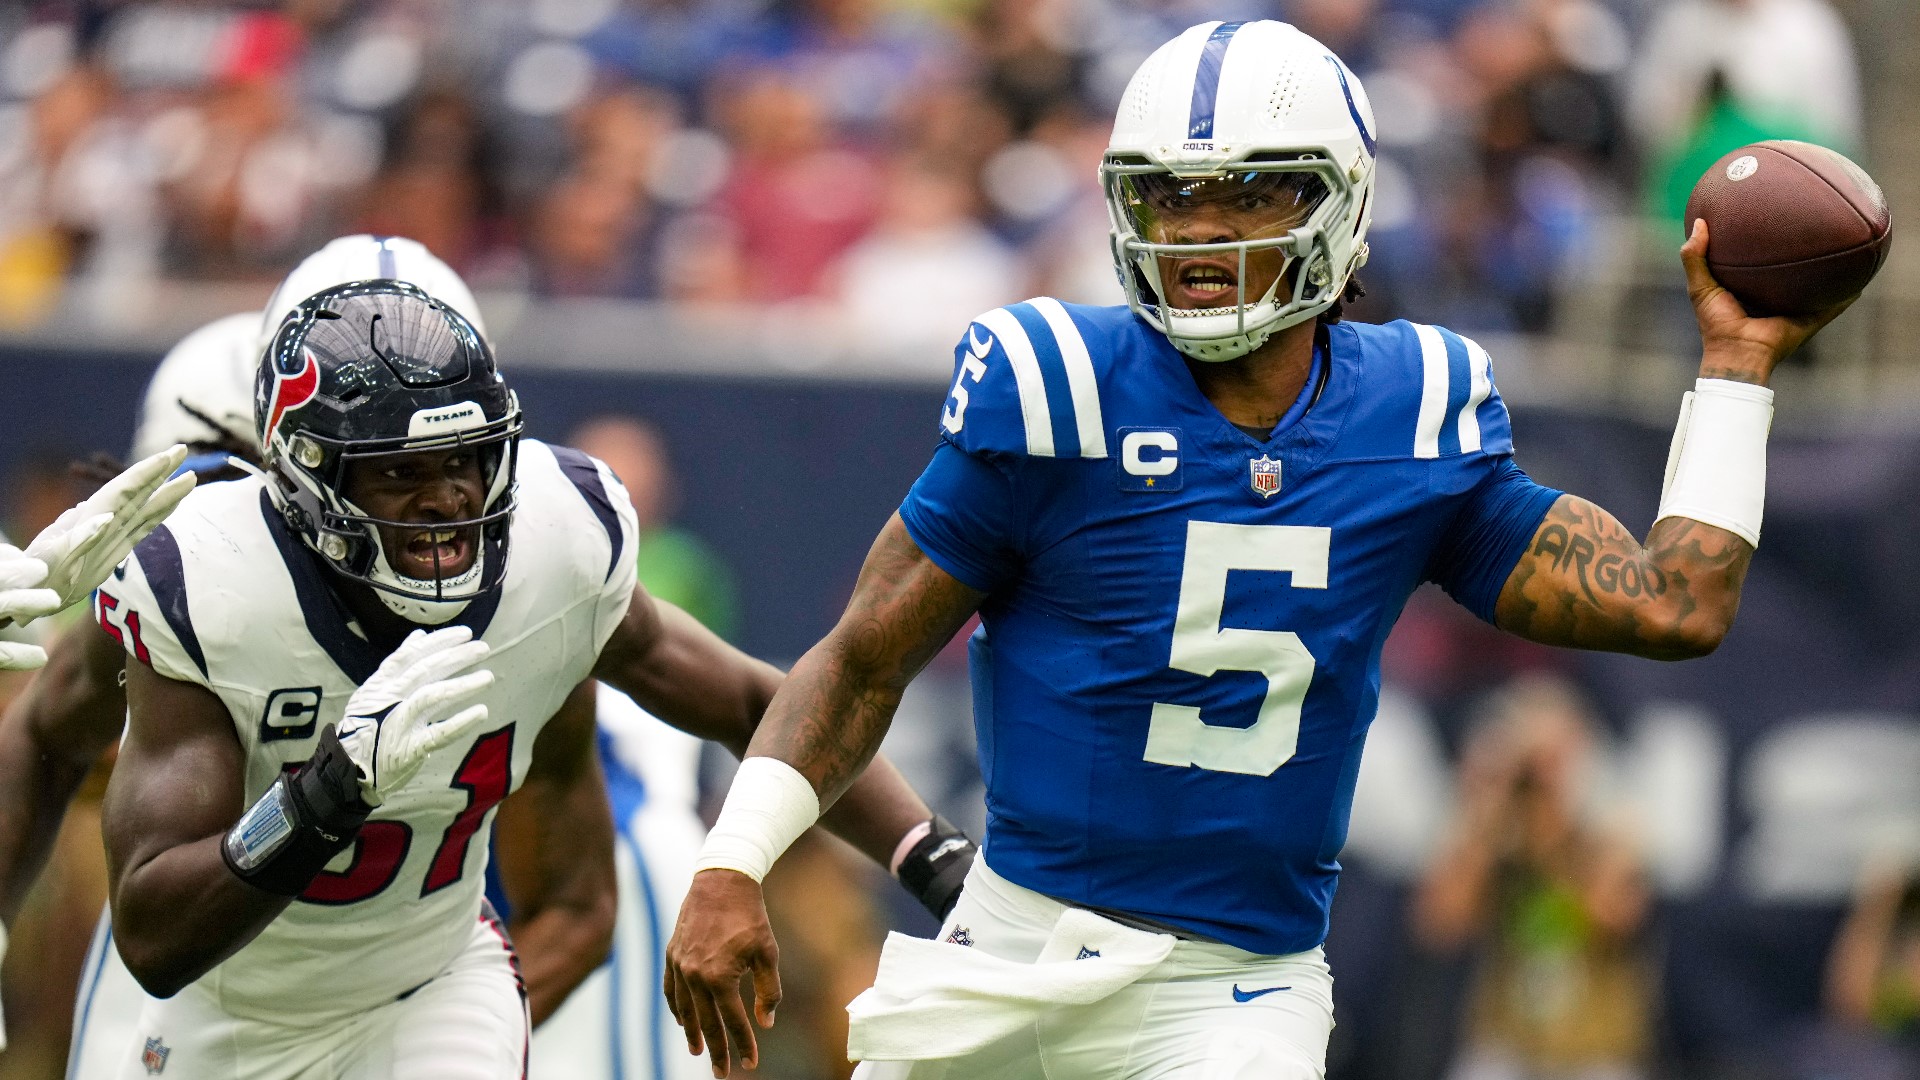 Dave Calabro breaks down the Colts 31-20 win over Houston.